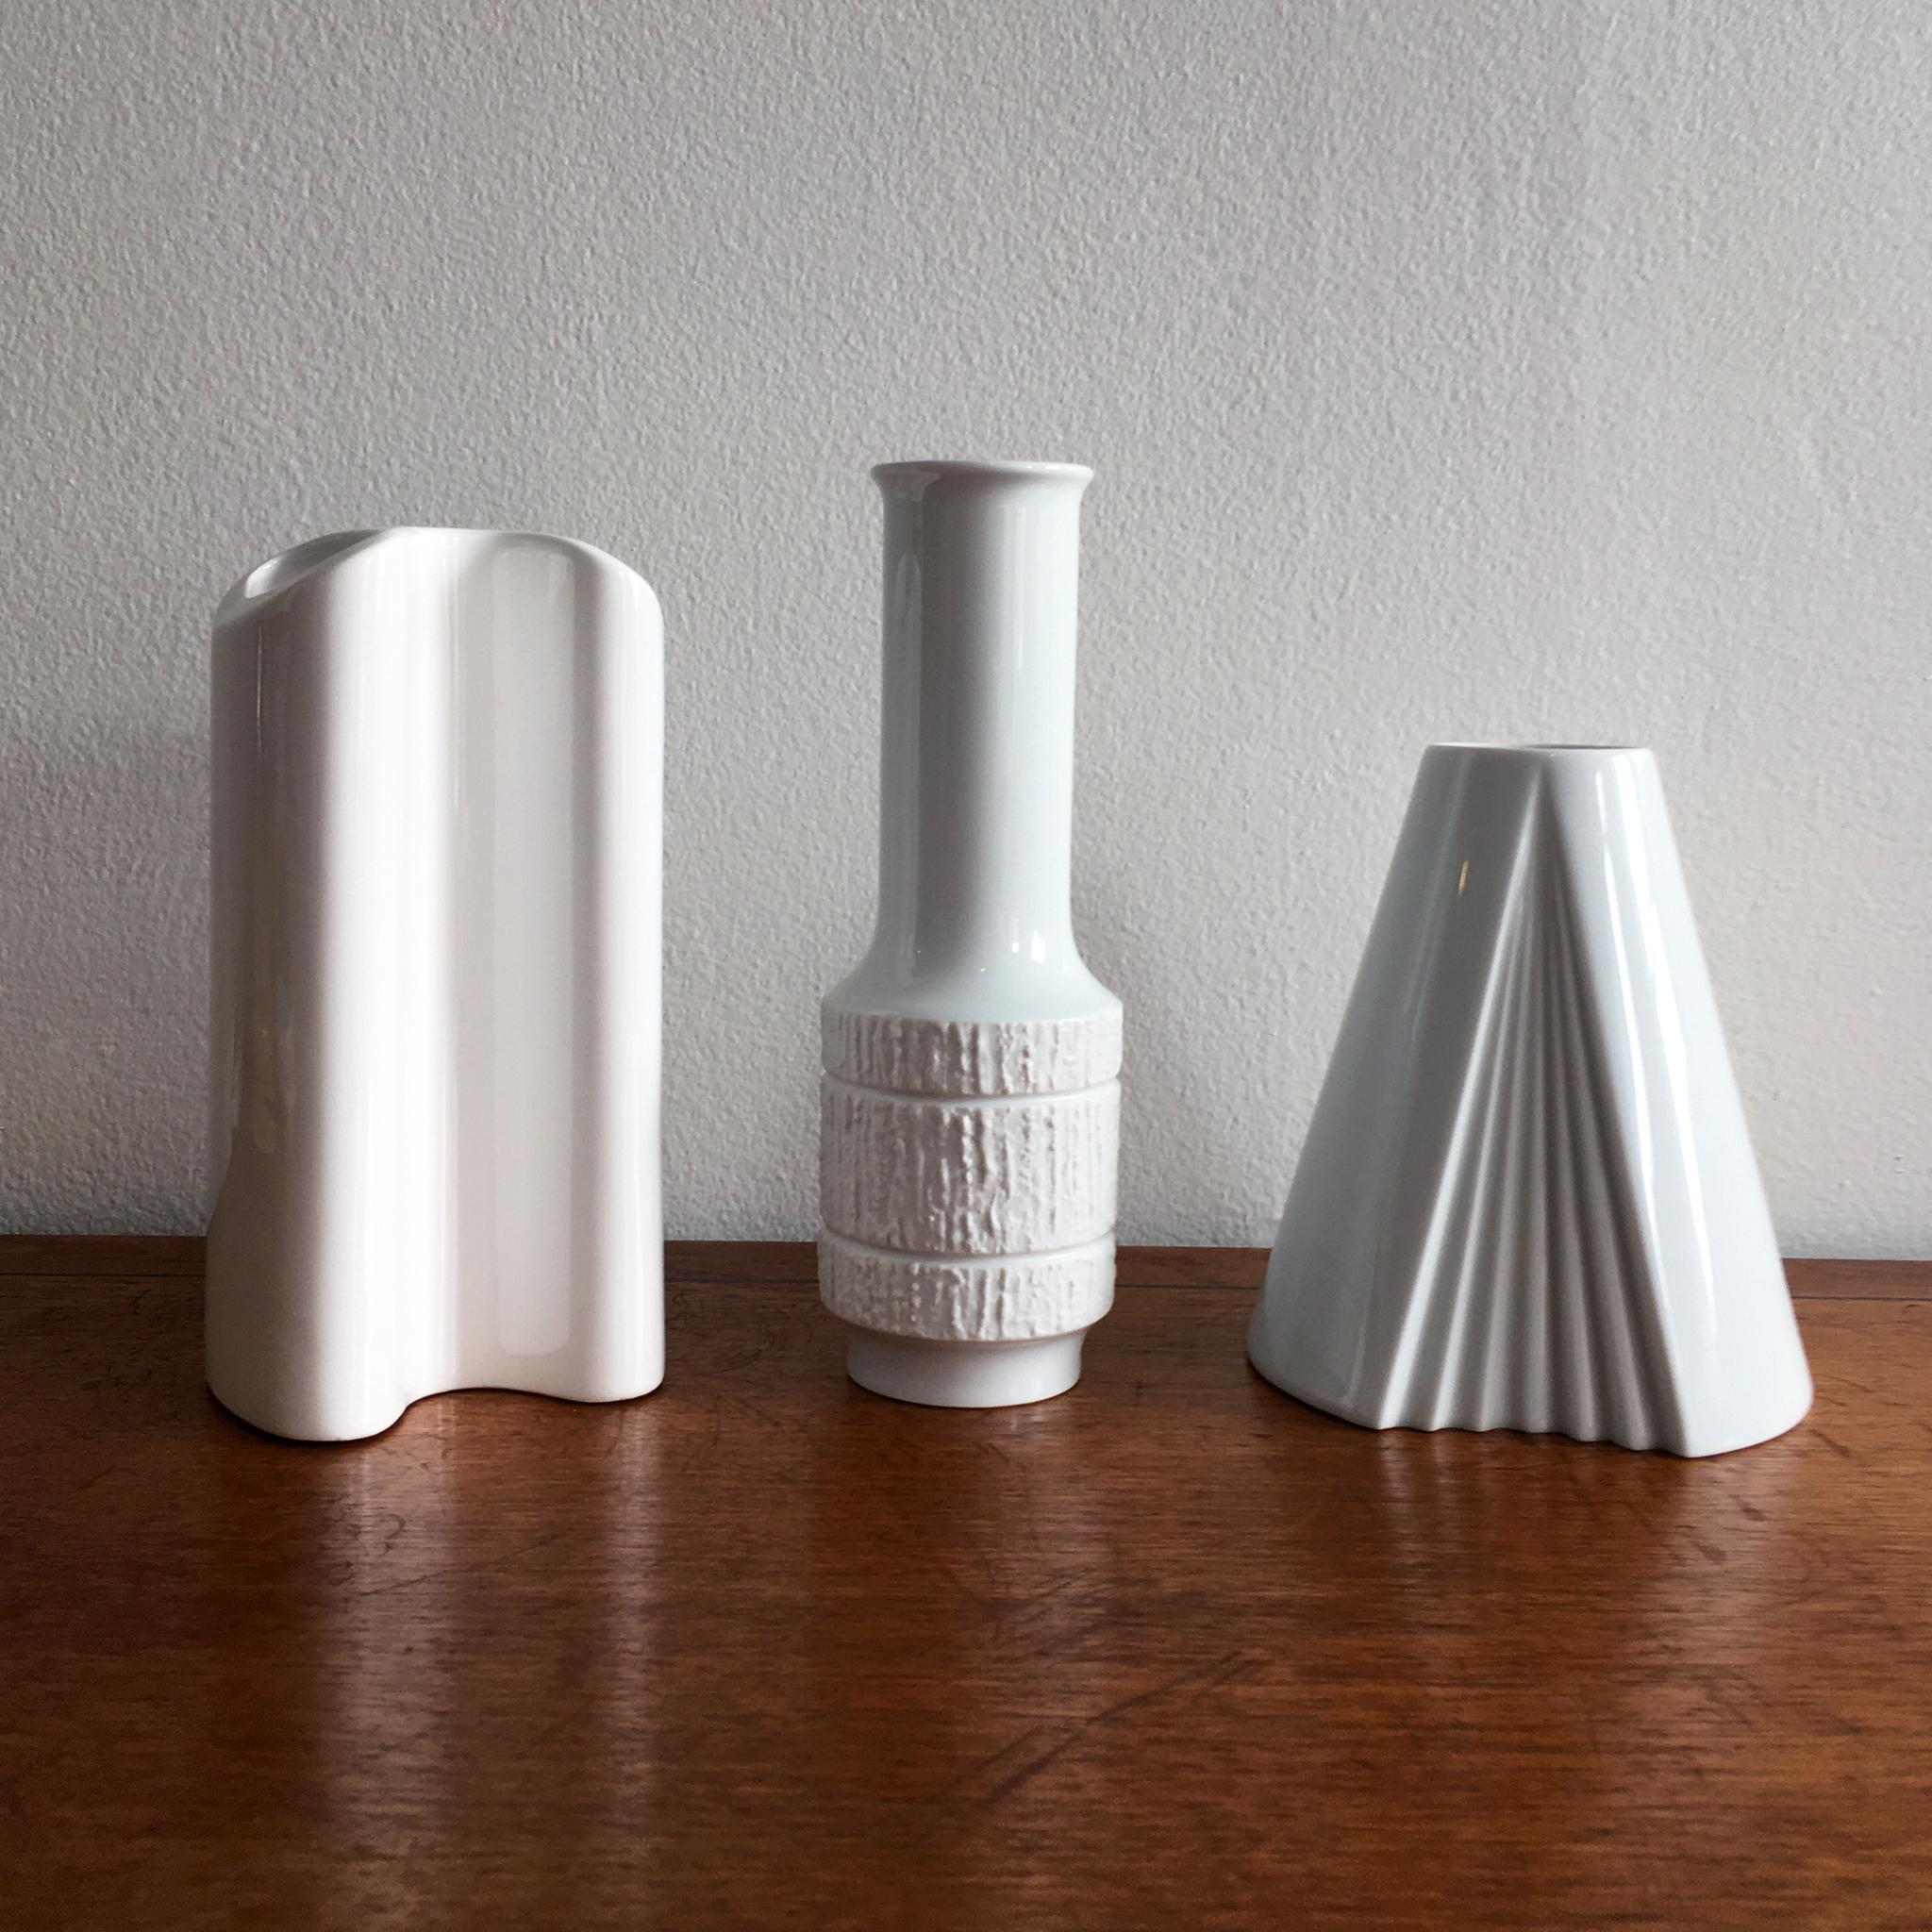 Trio of white vases including Thomas textured bisque detail vase by Richard Scharrer, Dansk curved design vase, Rosenthal Plissee vase by Ambrogio Pozzi. The shapes and textures of this trio beautifully complement each other. 

Measurements: